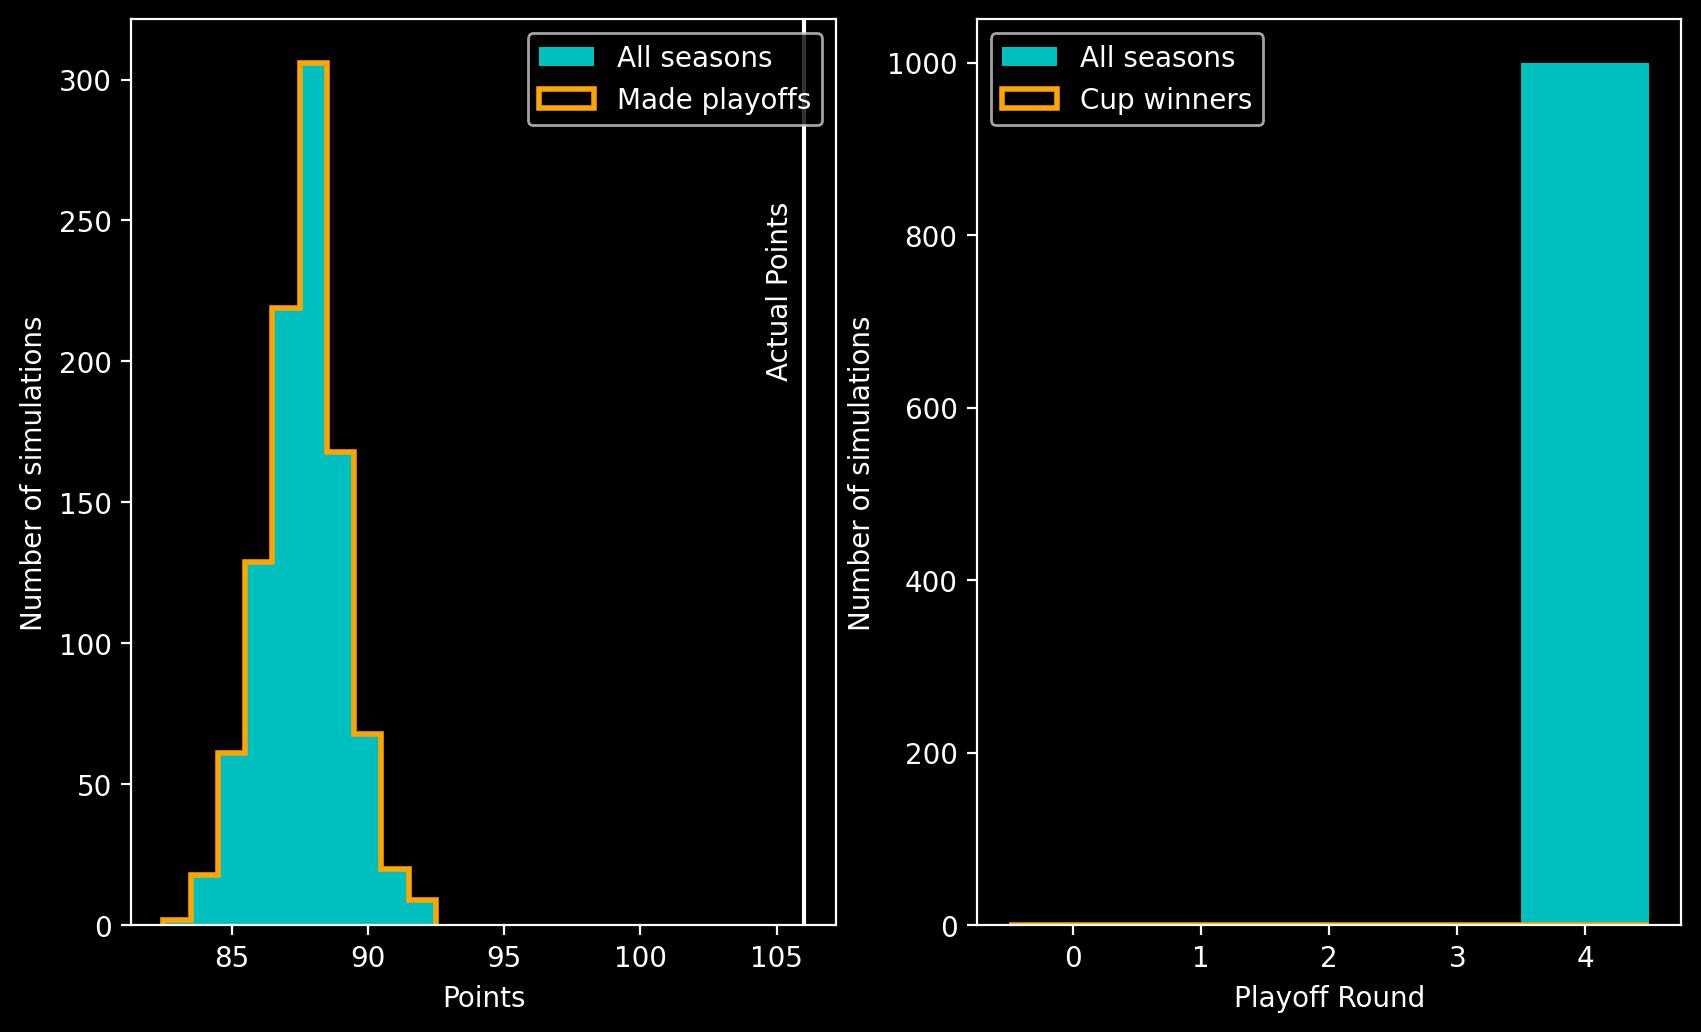 Two panel plot showing histograms. Left panel shows a histogram of points on the x-axis against number of simulations on the y-axis, the peak is at 88 points. Right panel shows playoff round on the x-axis against number of simulations on the y-axis. The largest bar is at playoff round 4.